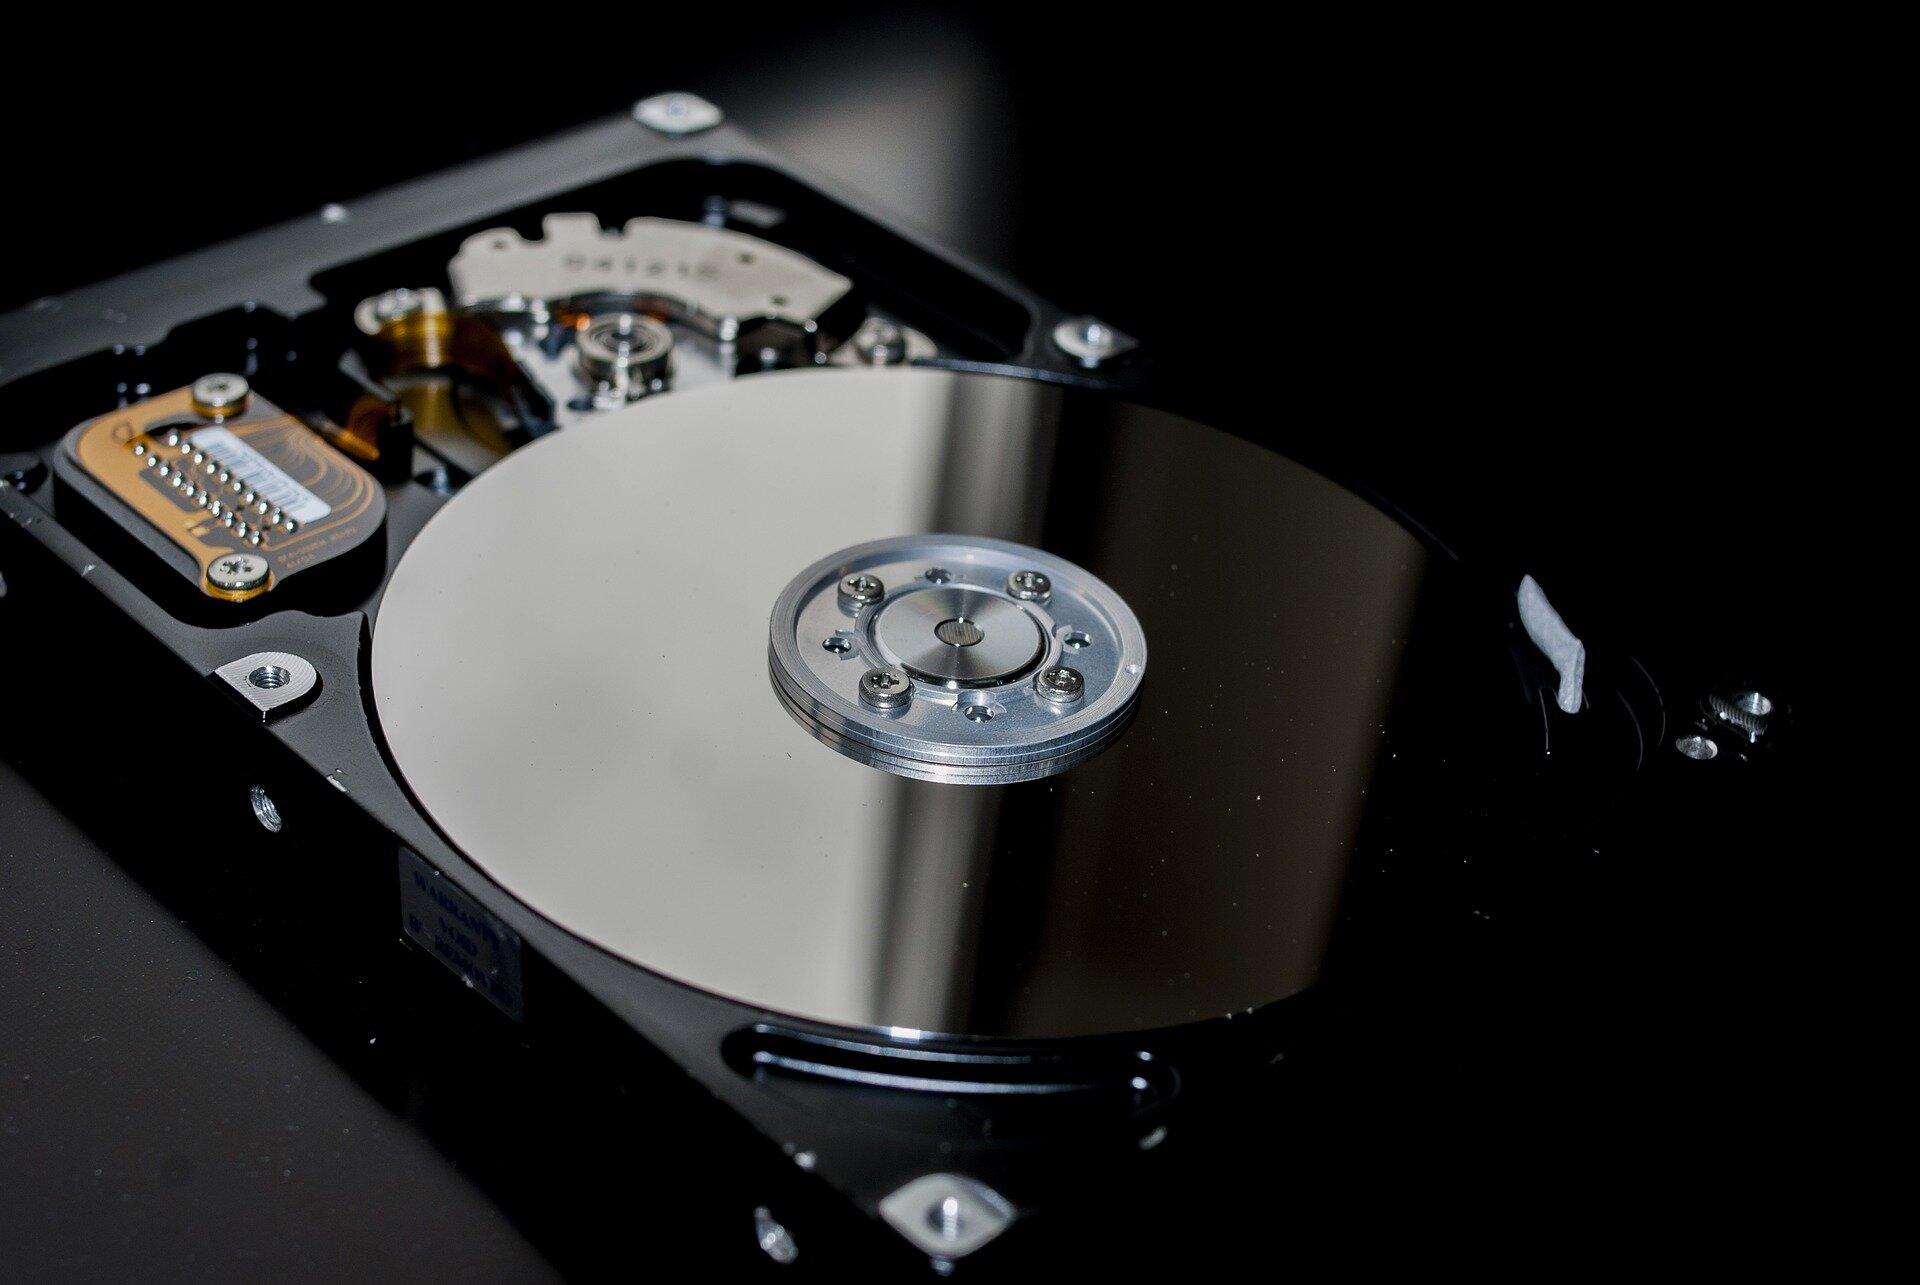 Using external hard drives to store your data might be a good alternative to only relying on cloud backups.